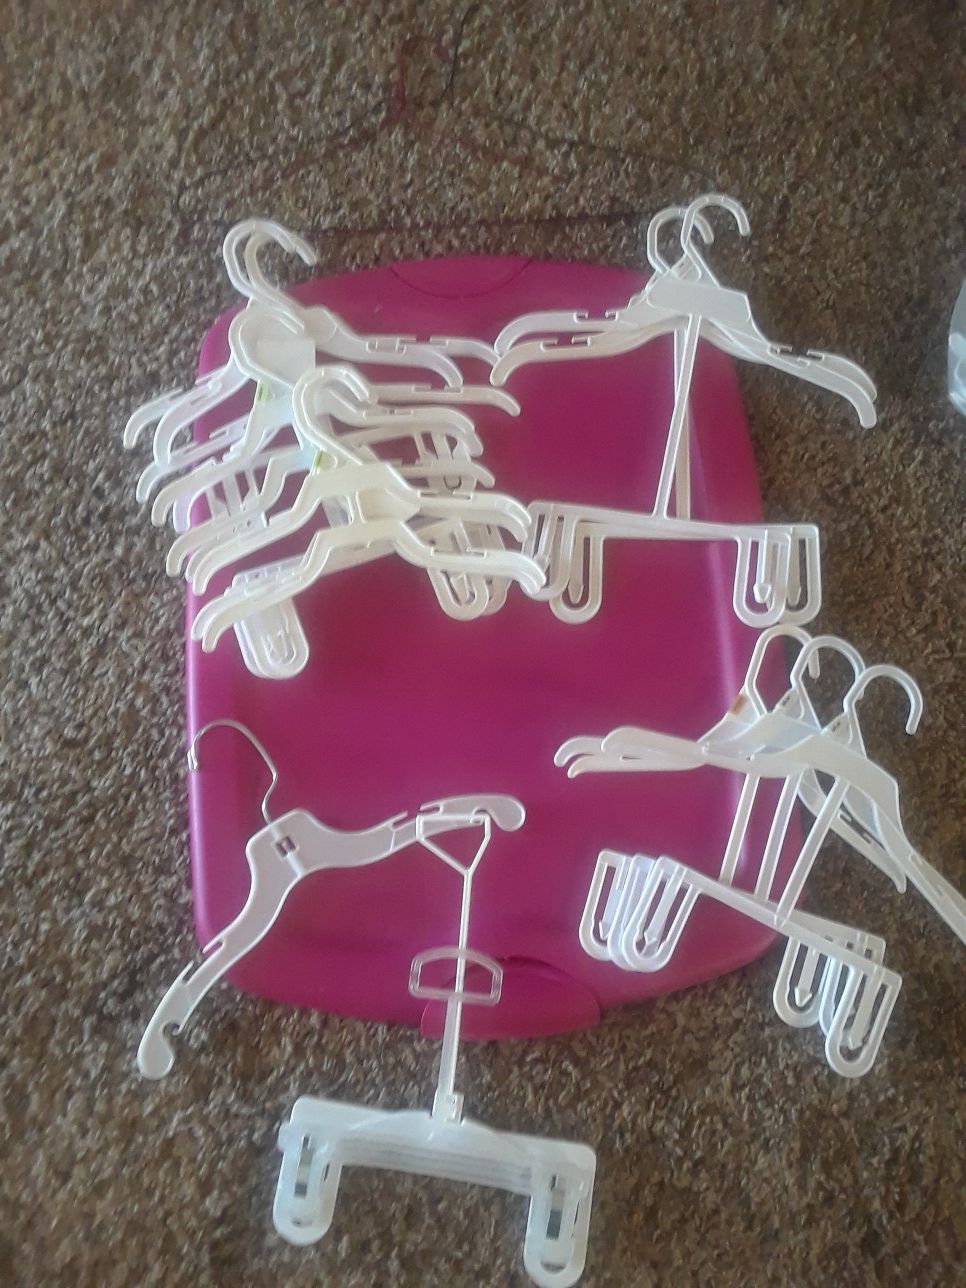 Free hangers for adults & children. Pick-up